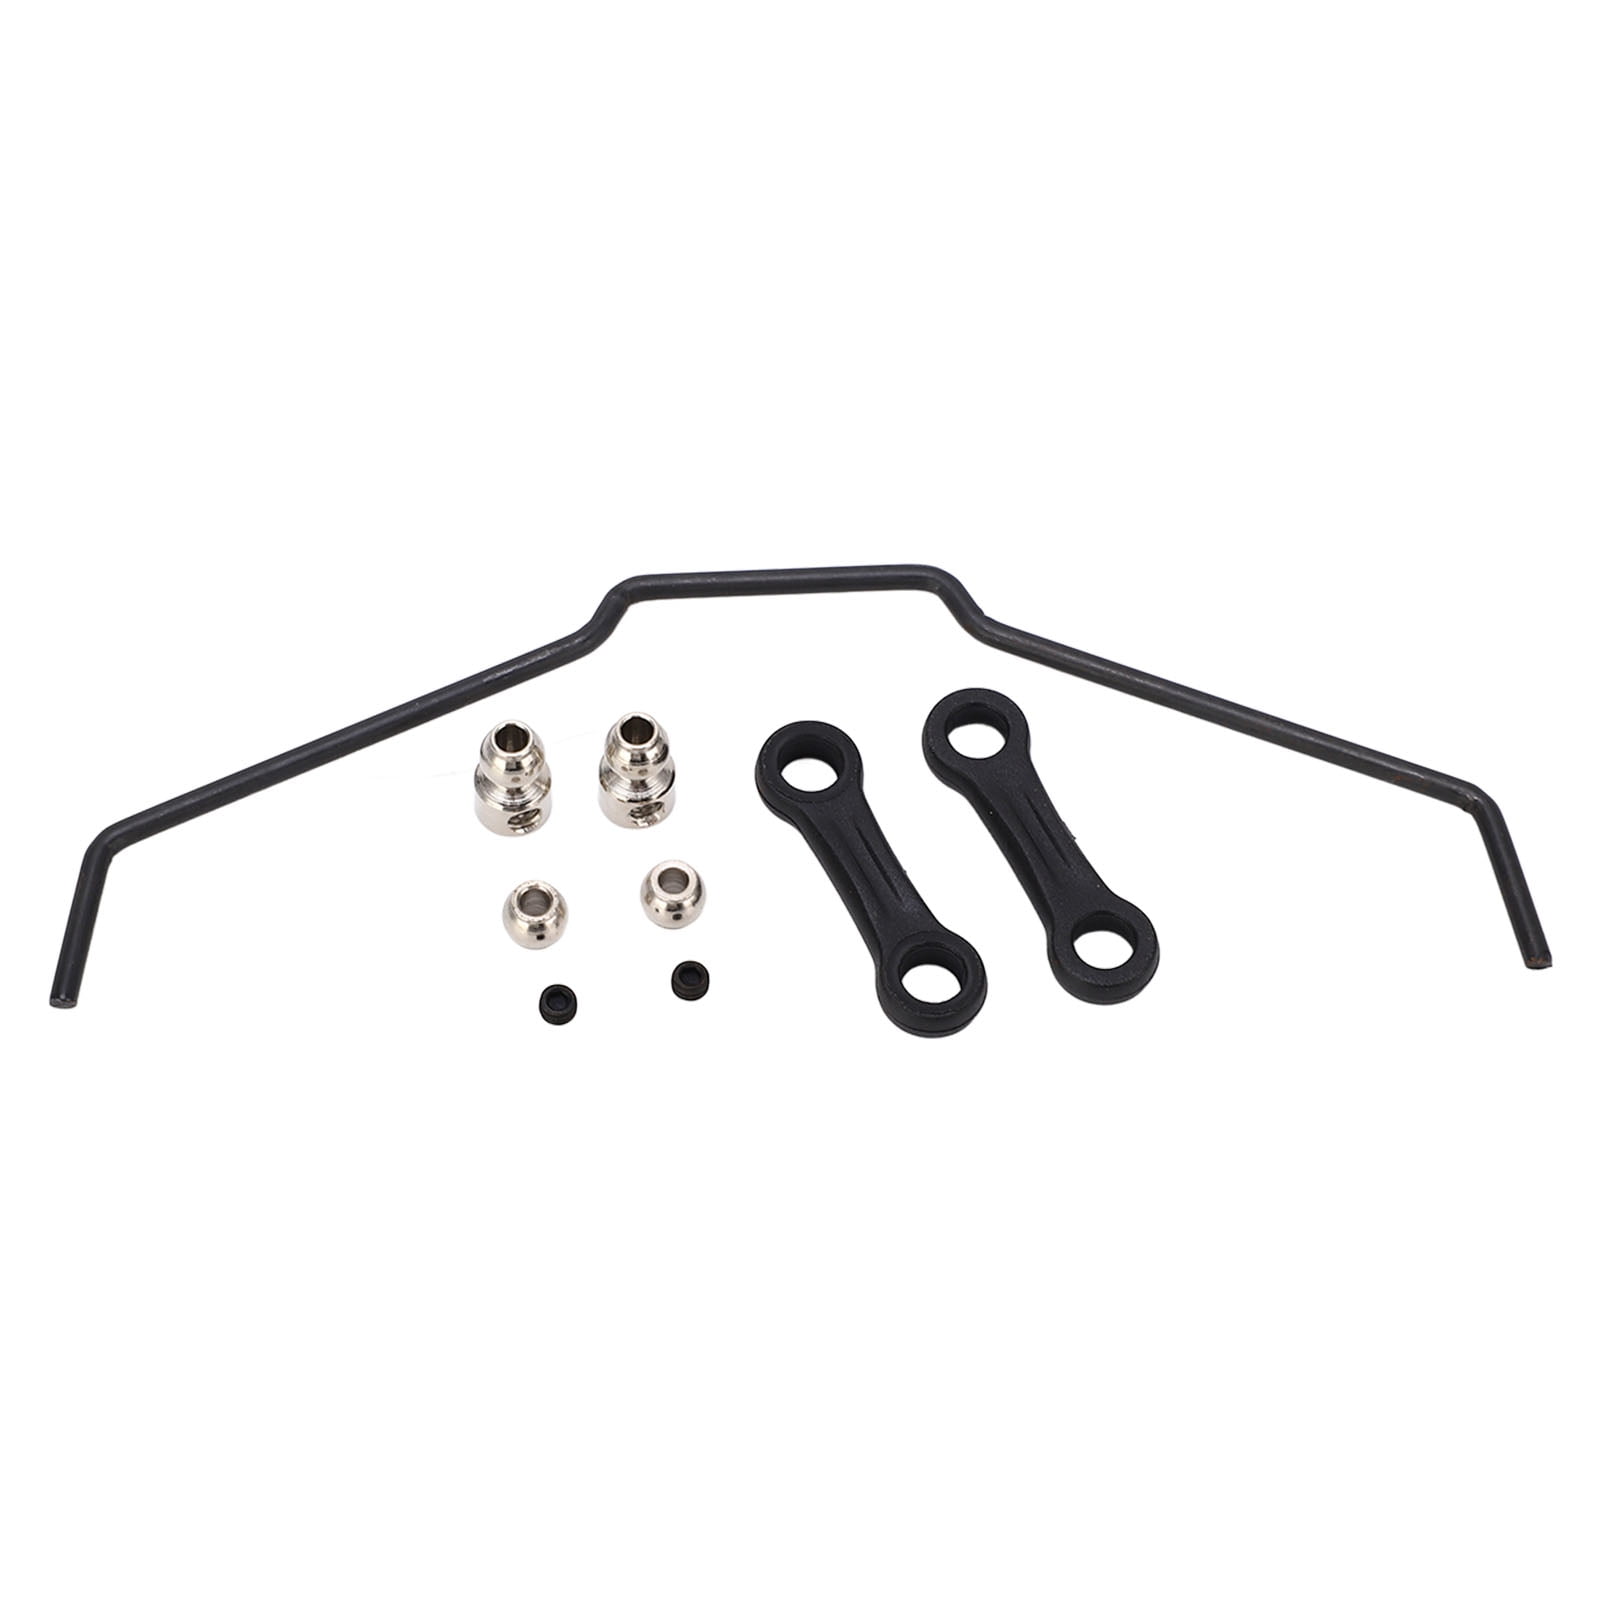 Tersalle RC Sway Bar Kit Anti Roll Bar Set Replacement Parts for ZD ...